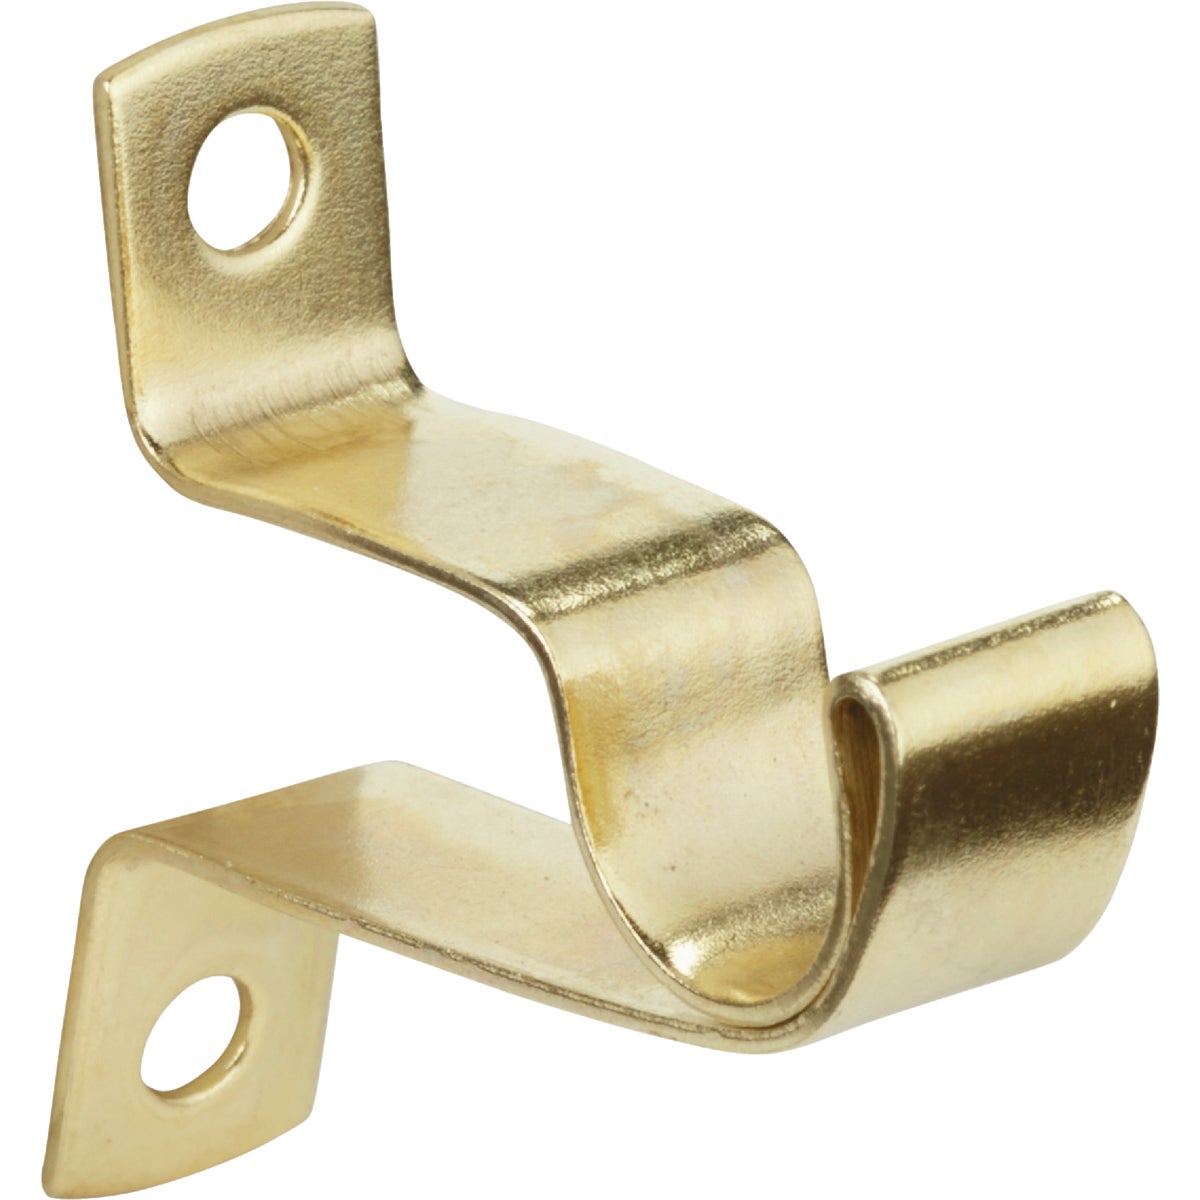 Item 618373, Decorative cafe rod bracket is suitable for use with 7/16 In. Dia.